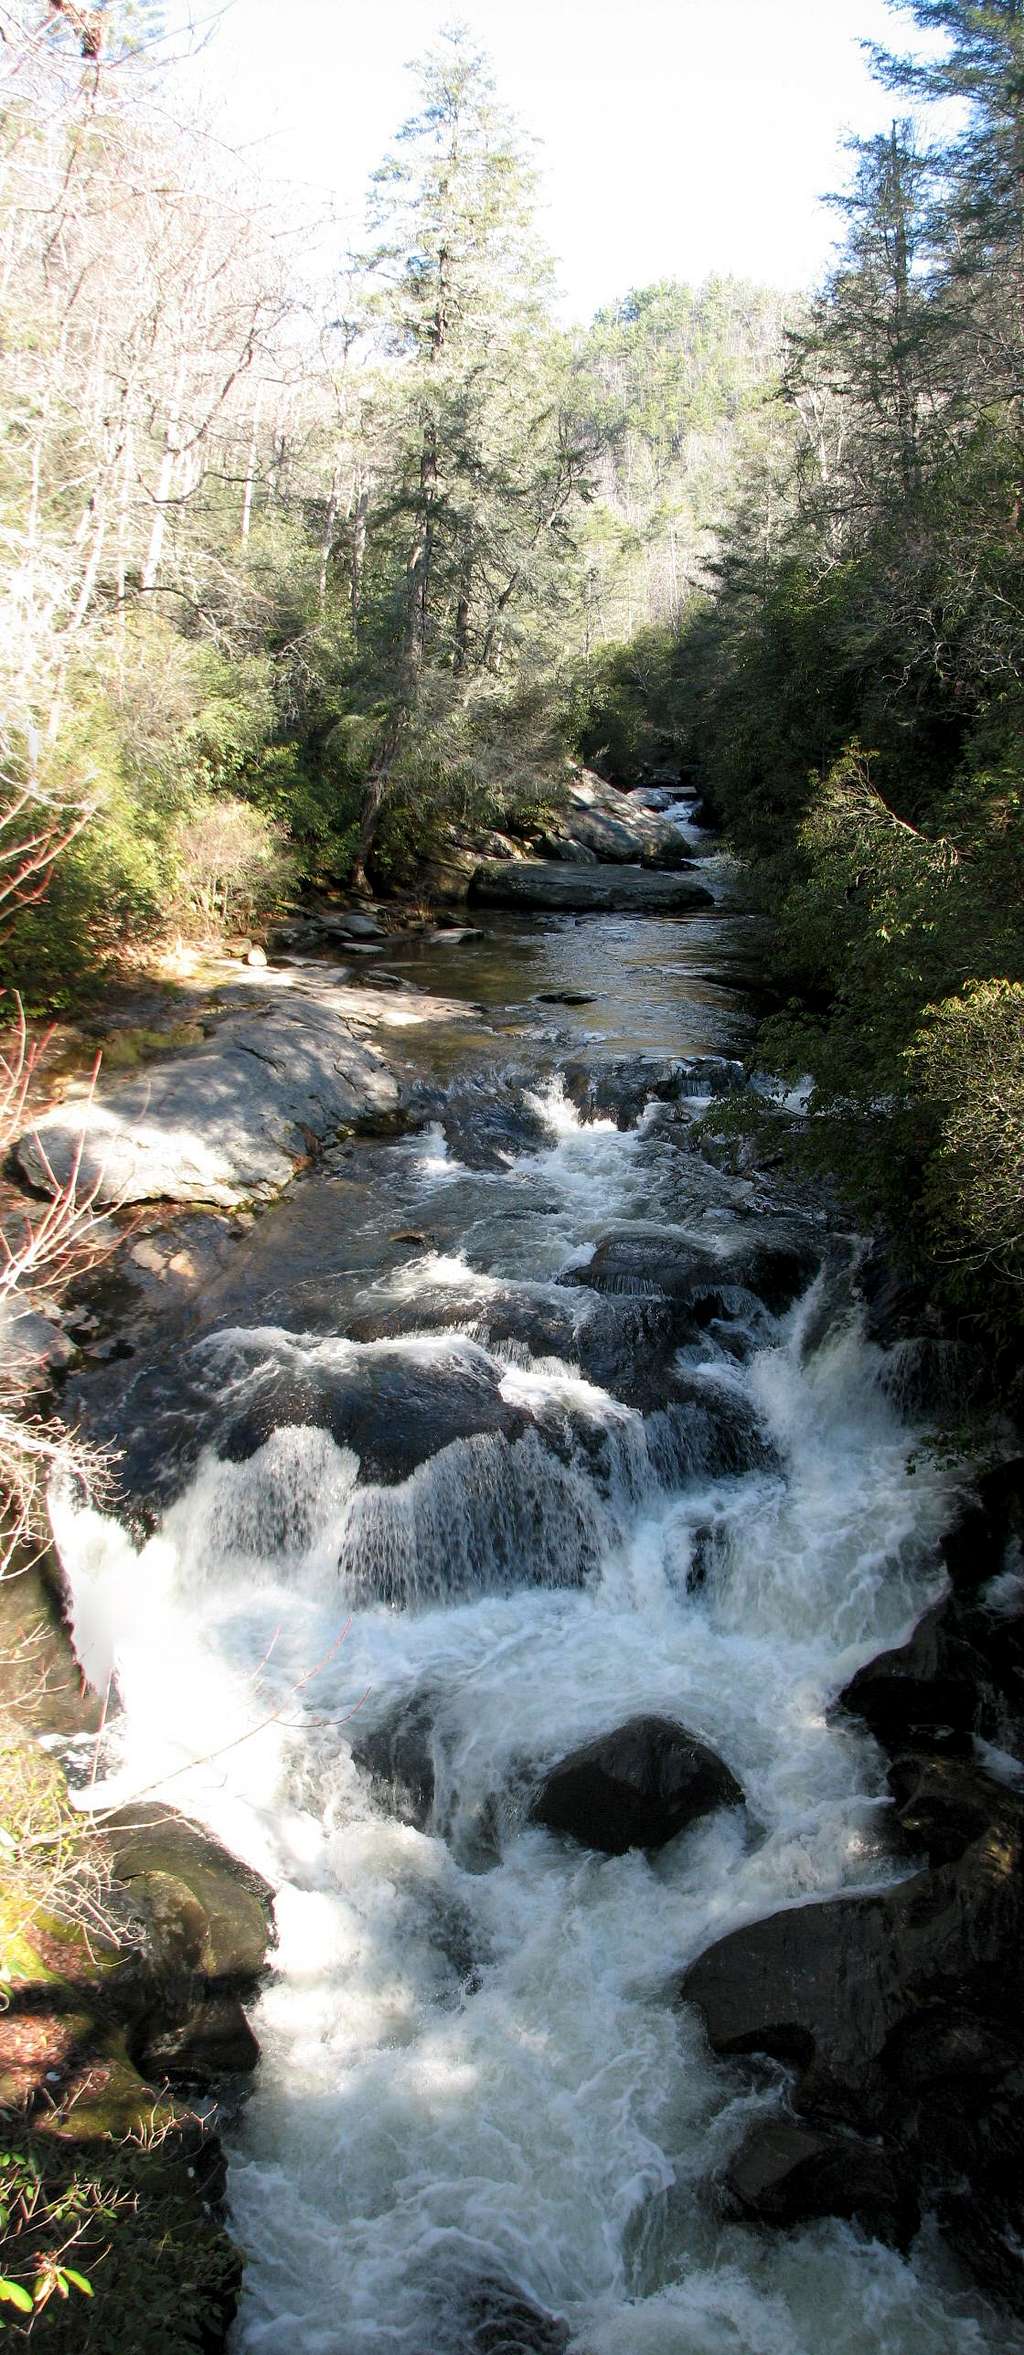 The Chattooga